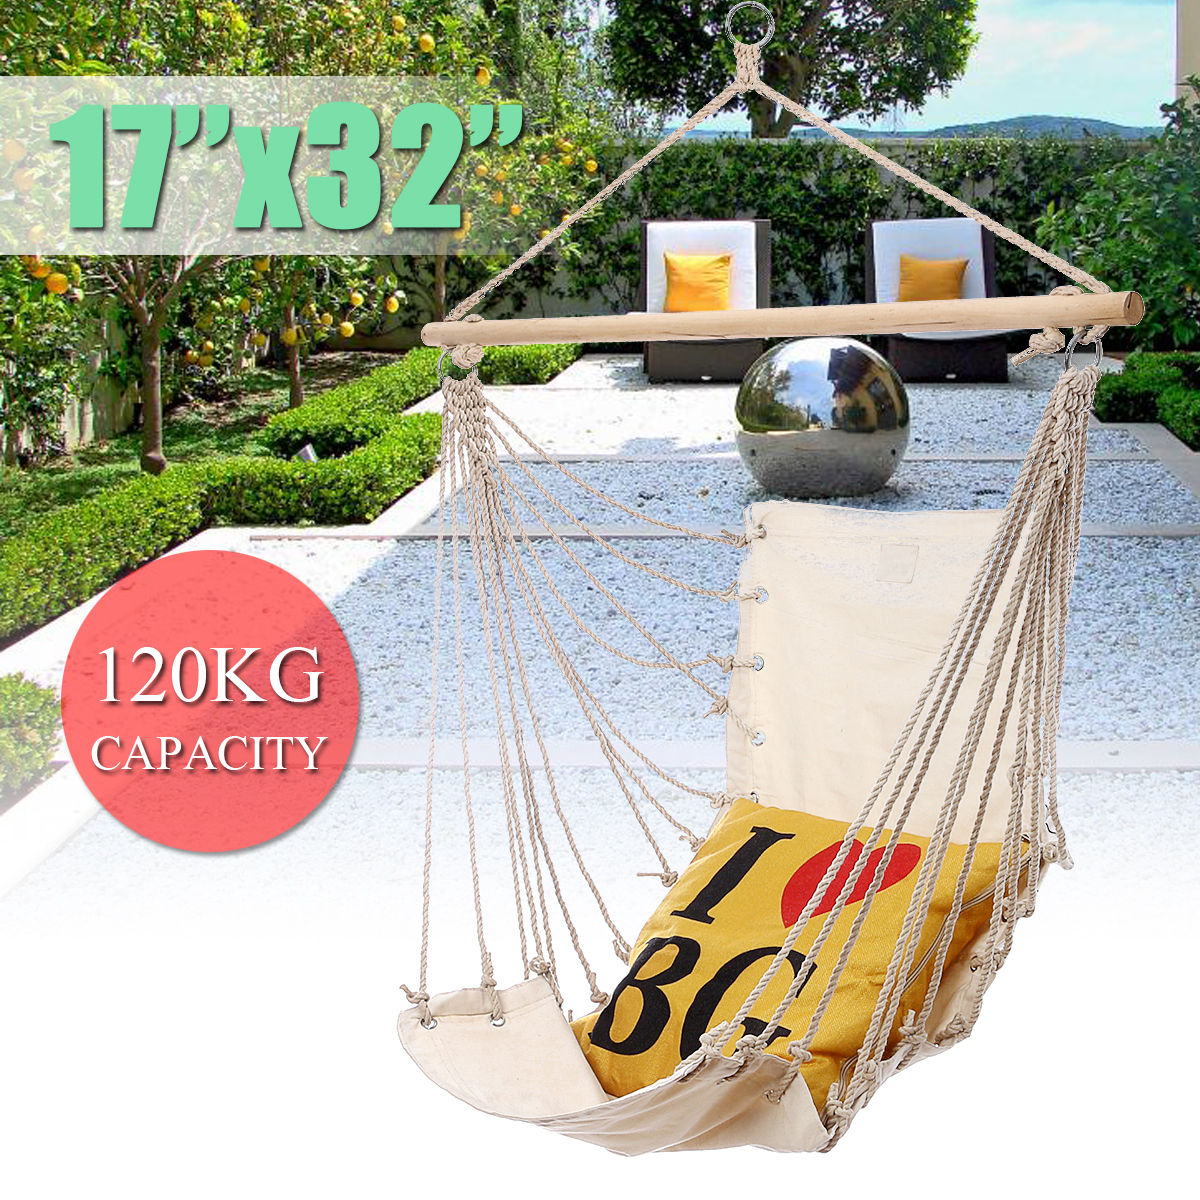 17x32inch-Outdoor-Hammock-Chair-Hanging-Chairs-Swing-Cotton-Rope-Net-Swing-Cradles-Kids-Adults-Swing-1319984